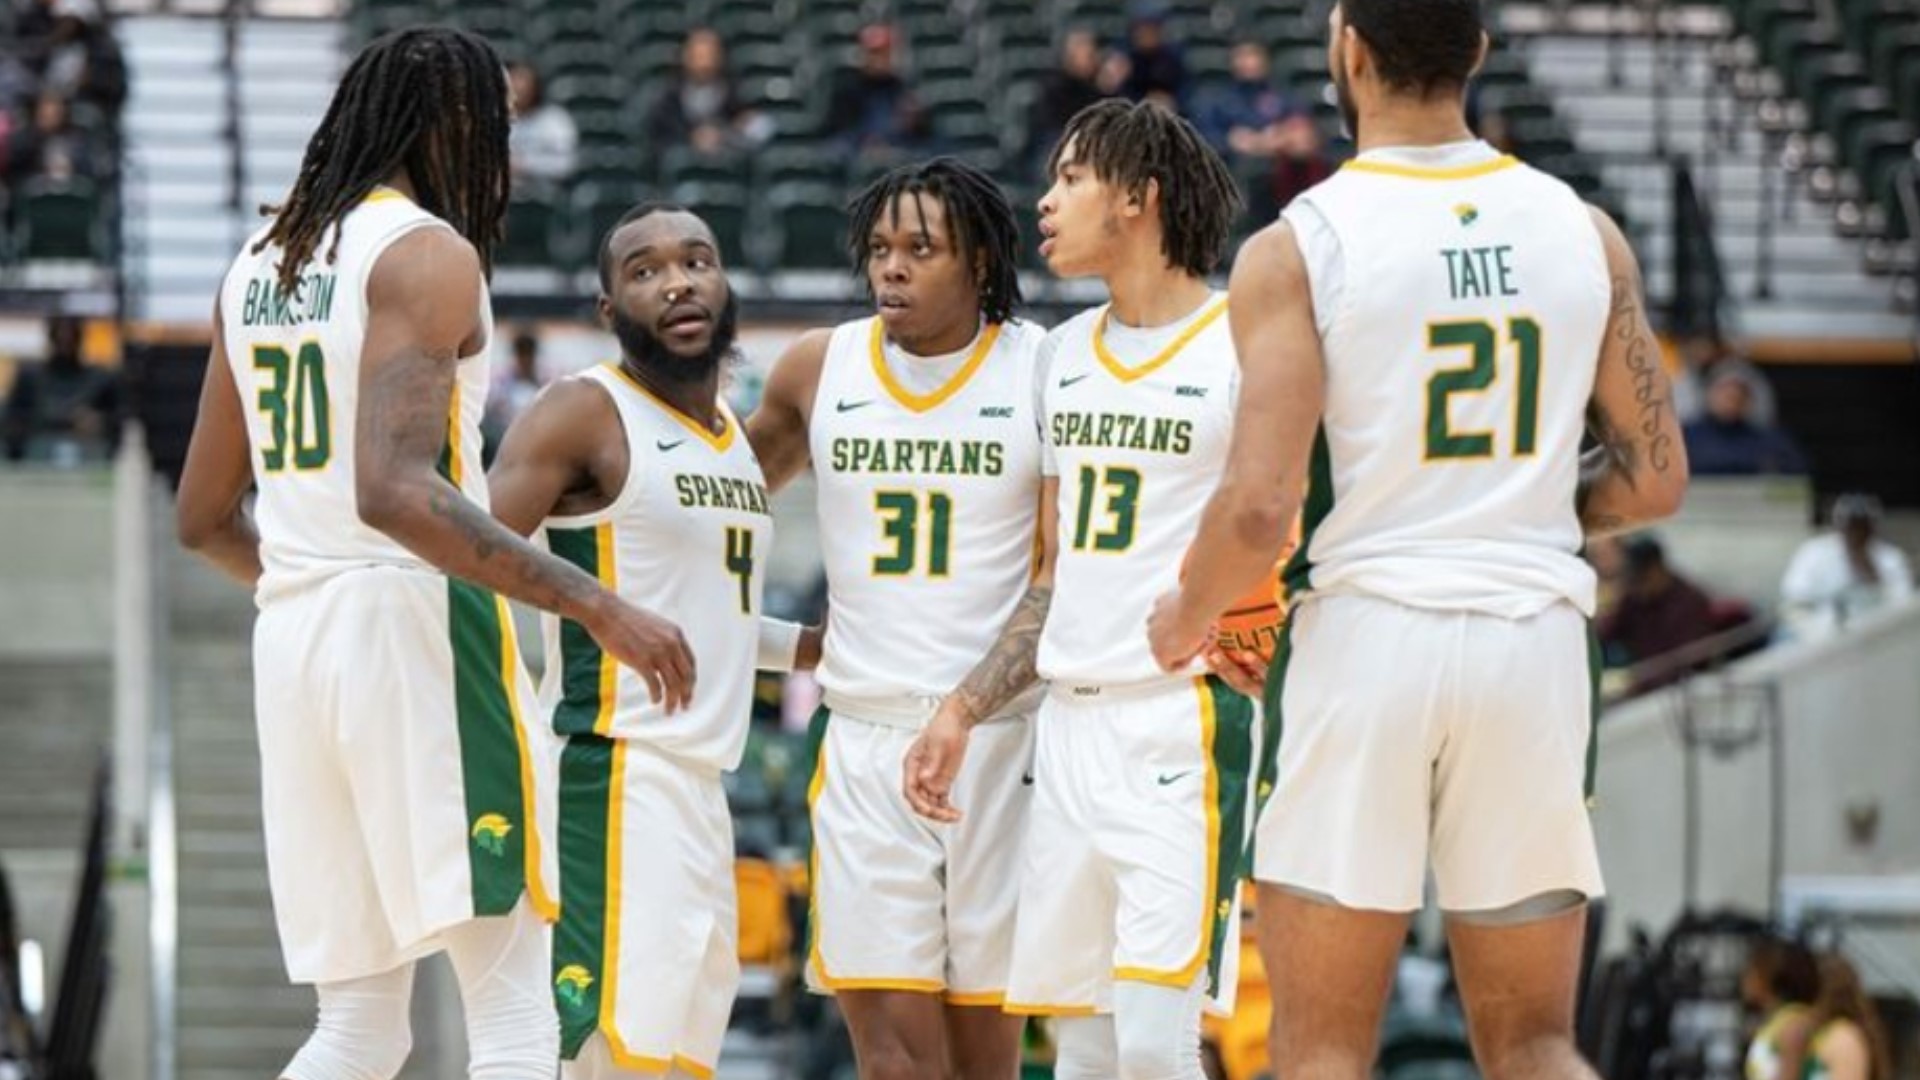 Norfolk State's Joe Bryant Jr. used the glass gracefully for an acrobatic go-ahead basket in with 1.4 seconds left to play. An ensuing technical would come of it.